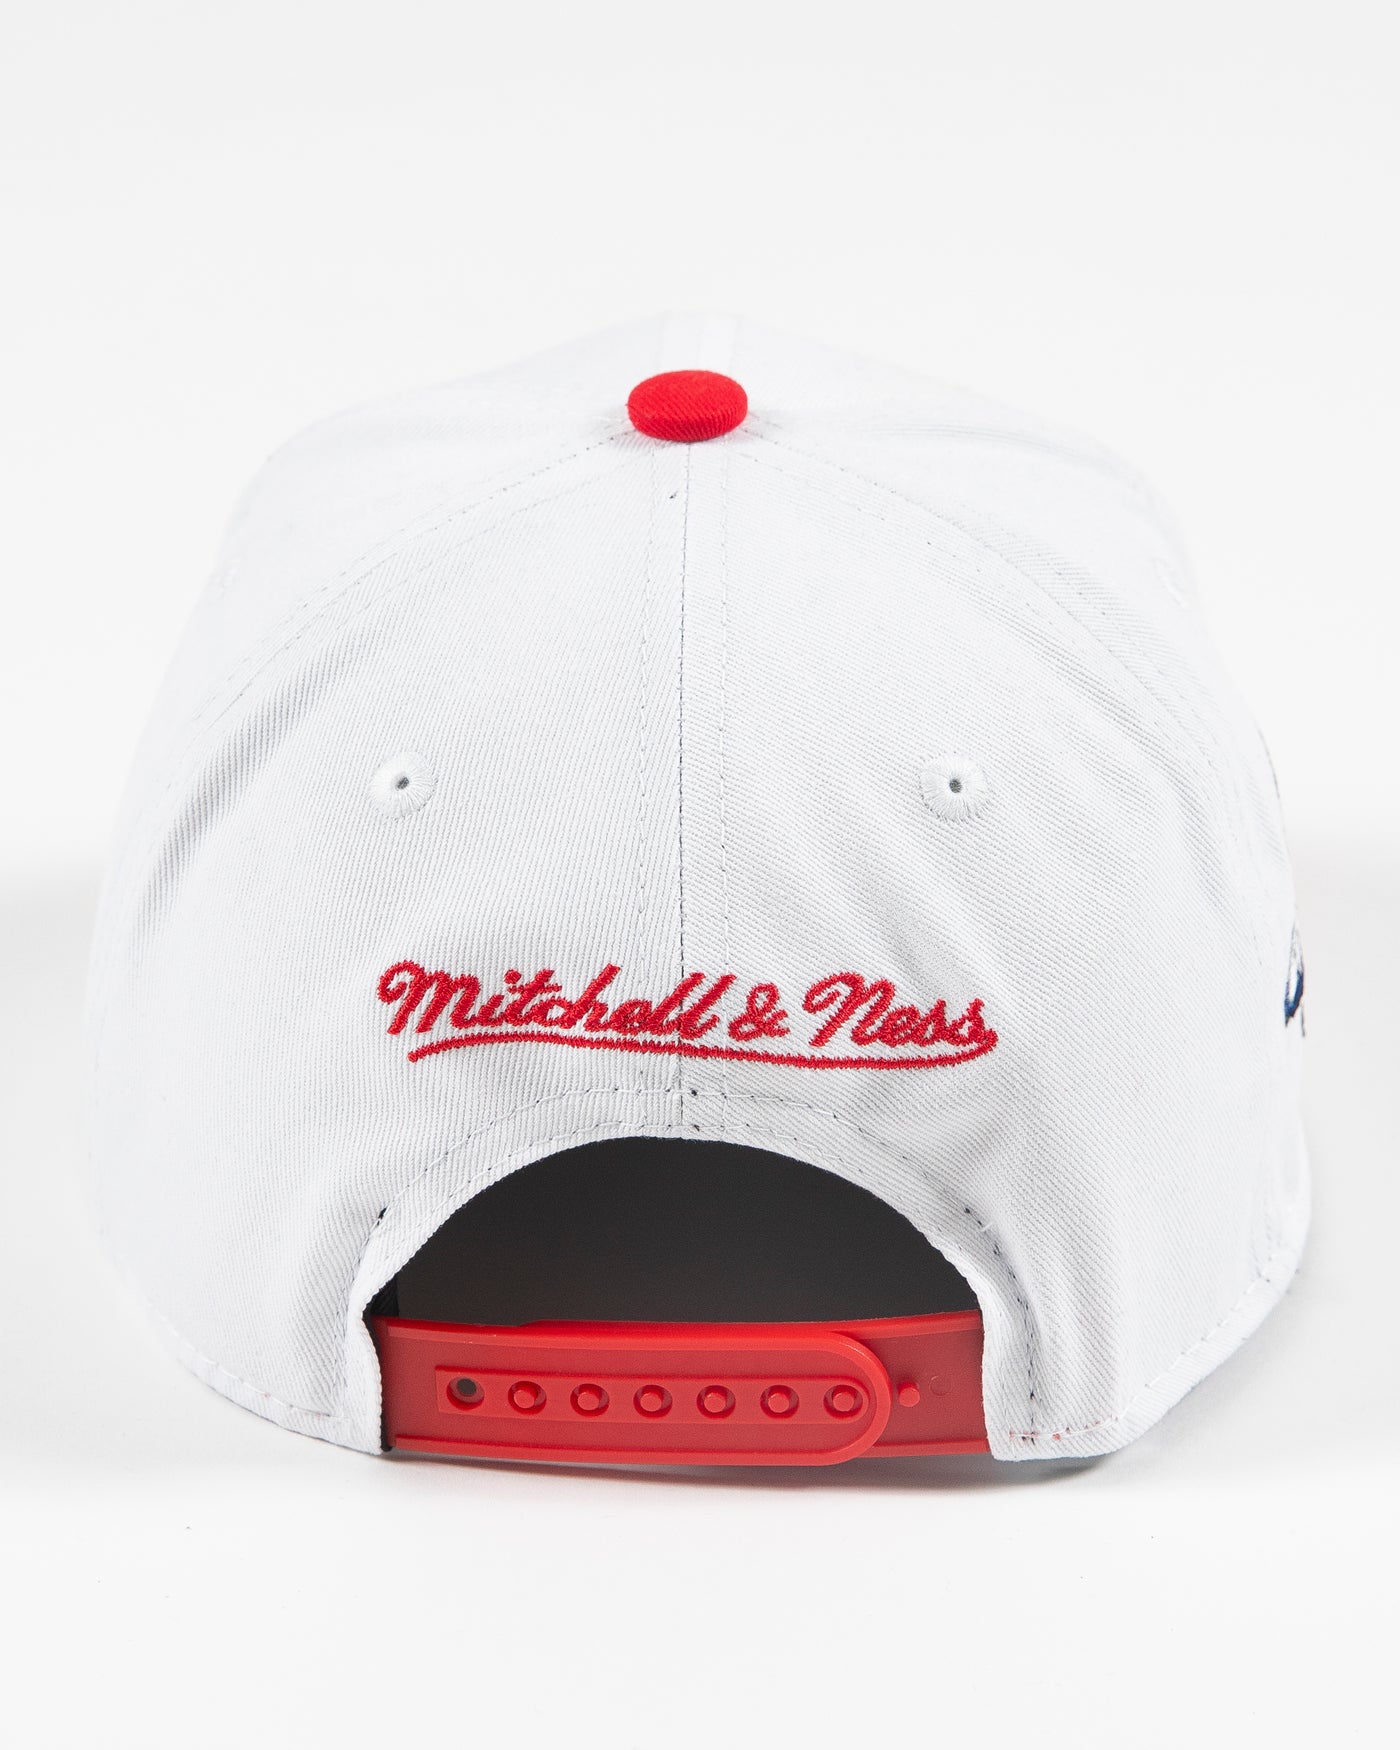 Champ'd Up Snapback Chicago Cubs - Shop Mitchell & Ness Snapbacks